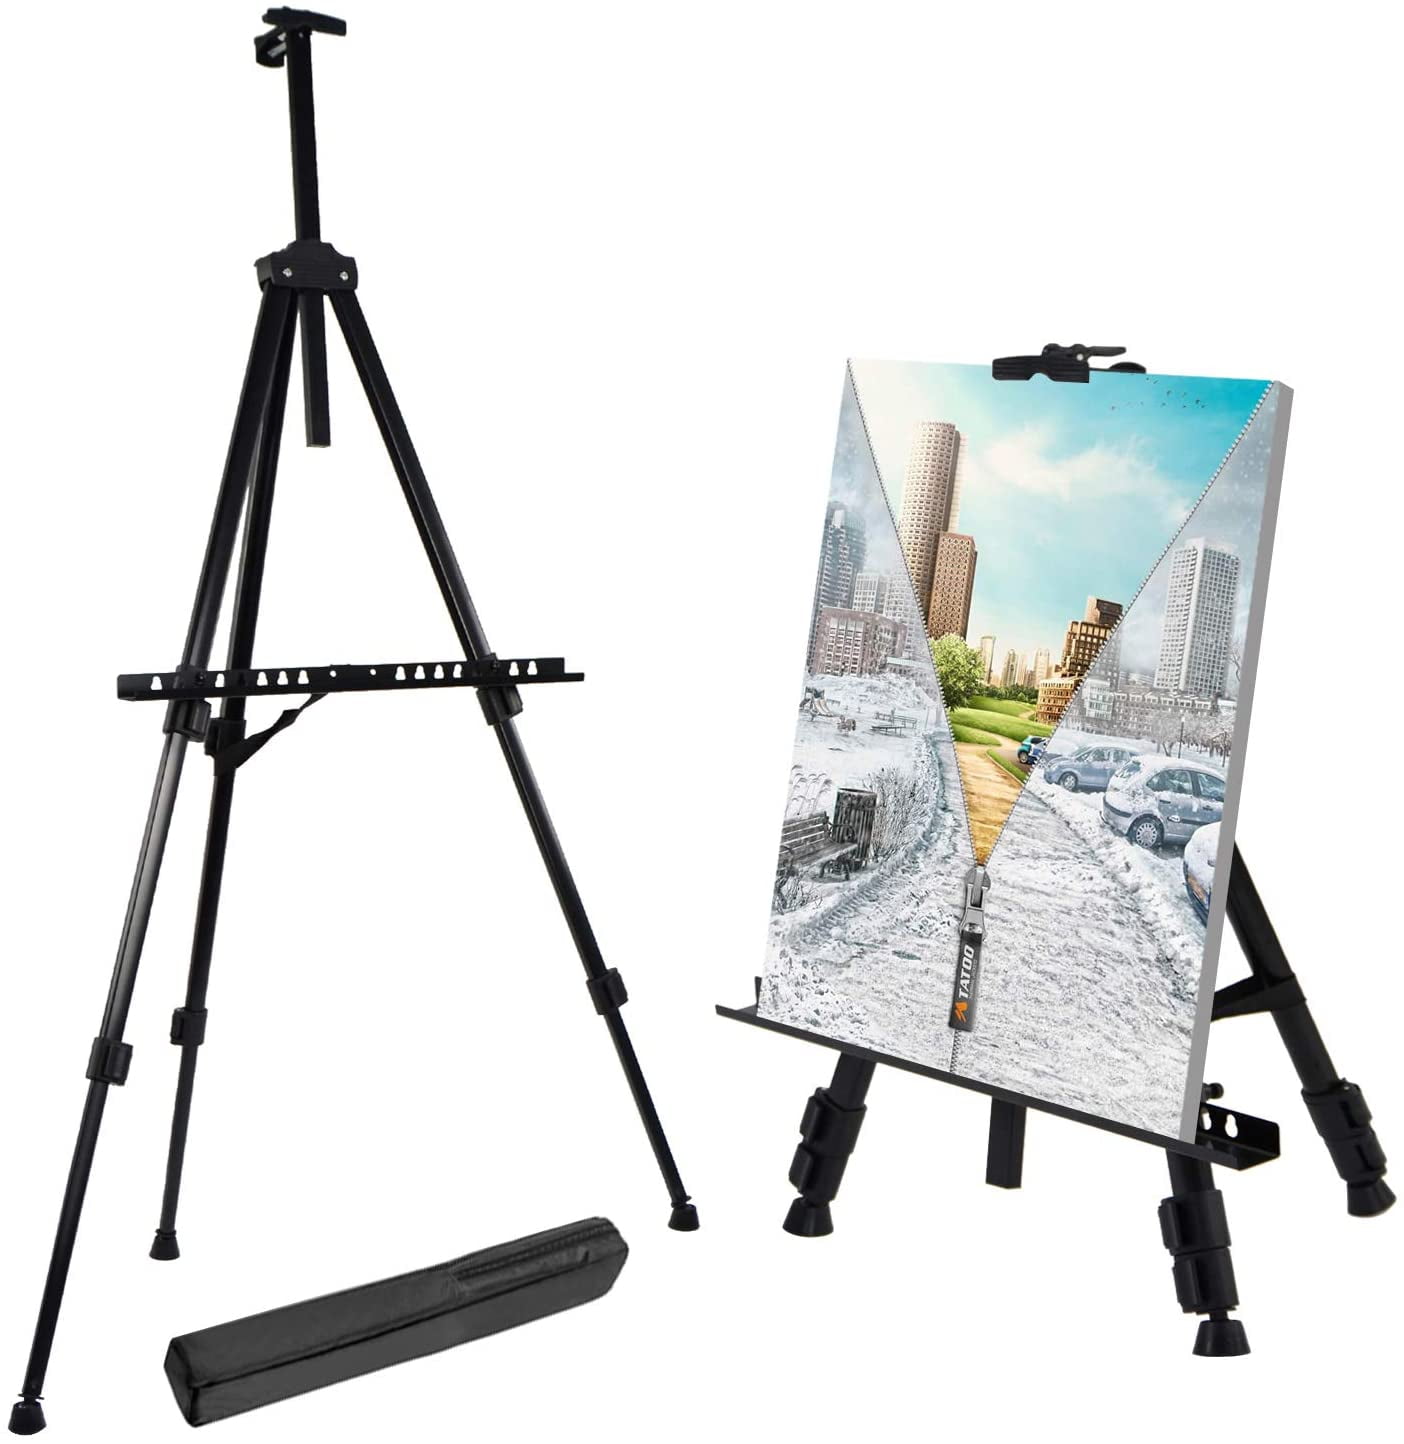 Adjustable Height from 21”-66 for Floor/Table with Portable Carry Bag Aluminum Art Easel Tripod Display Easel Versatile Display Stand 